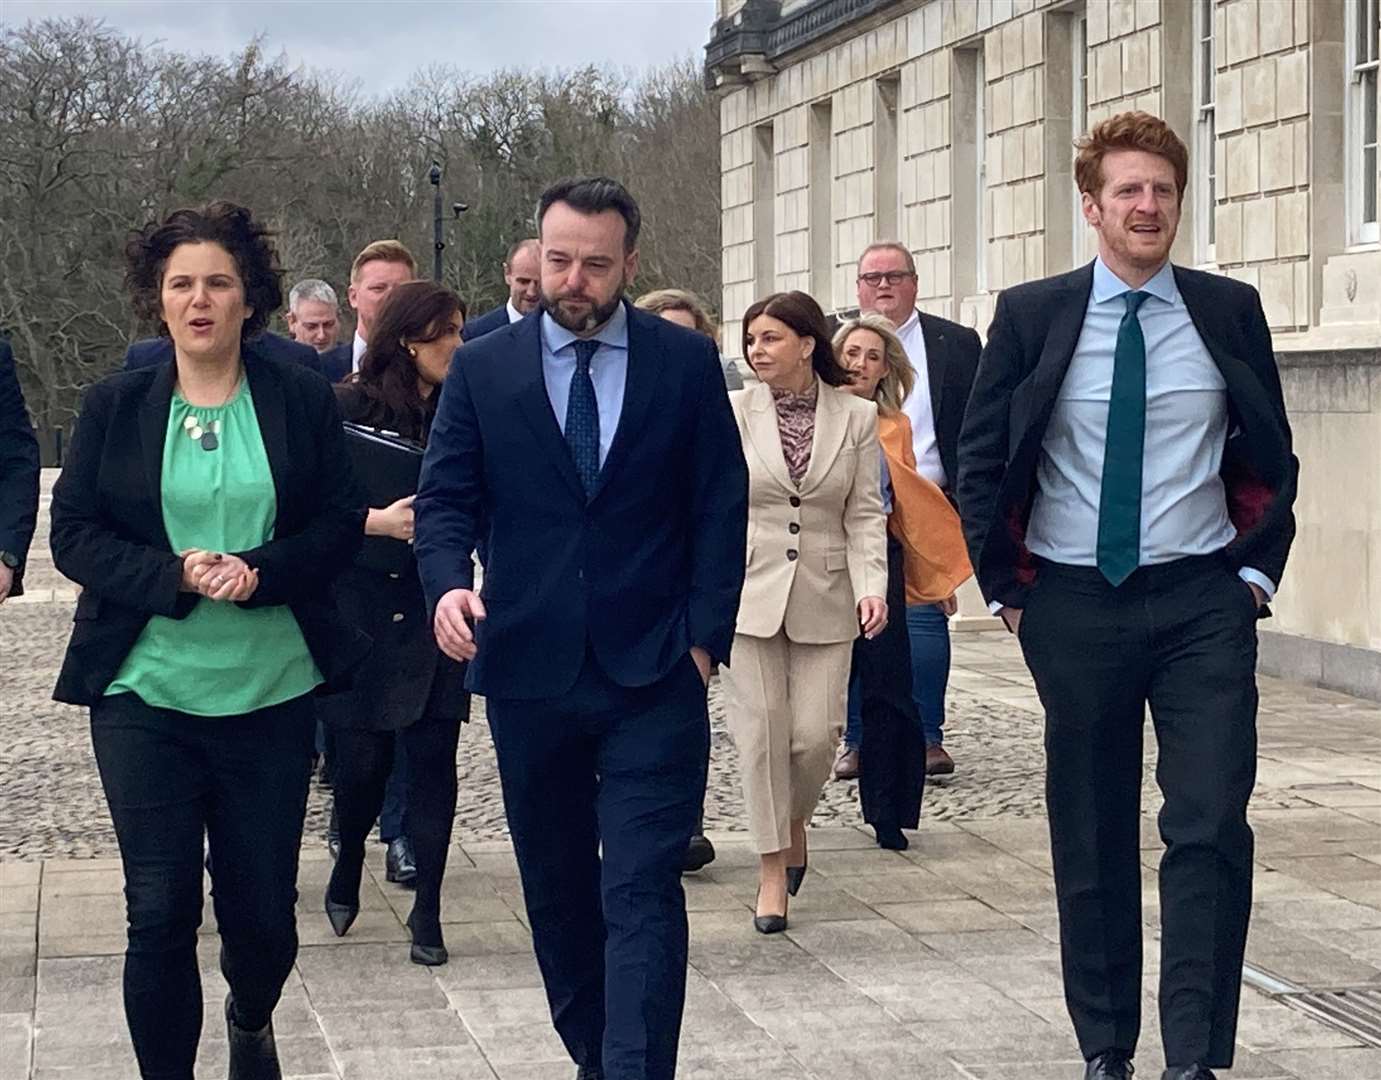 SDLP leader Colum Eastwood (centre), with South Belfast MP Claire Hanna (left) and Opposition leader Matthew O’Toole at the first Opposition Day at Stormont (Rebecca Black/PA)